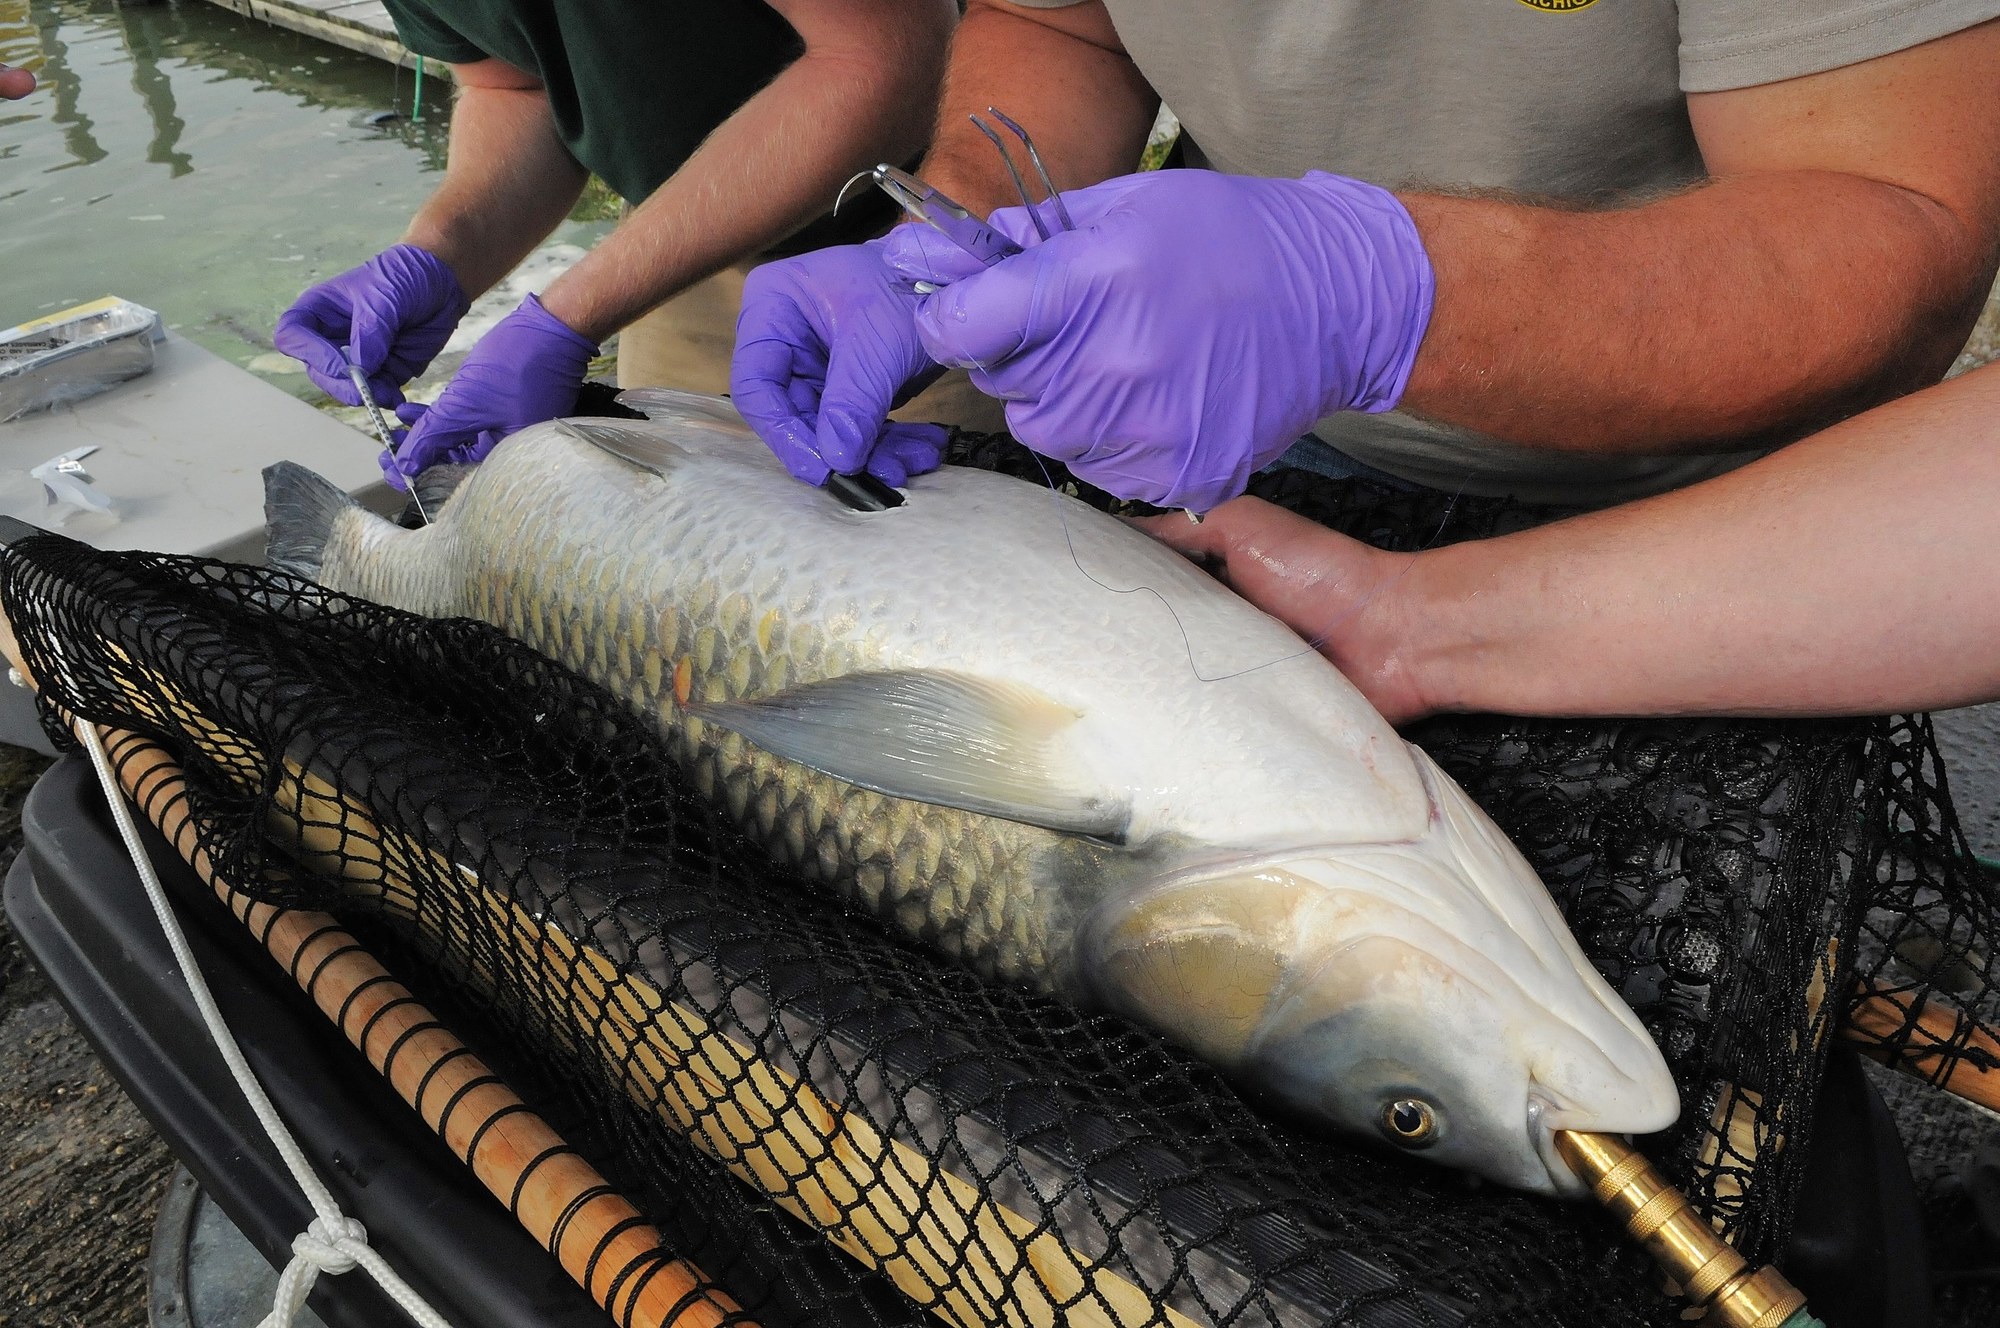 An acoustic transmitter is shown being inserted into the stomach cavity of a grass carp.